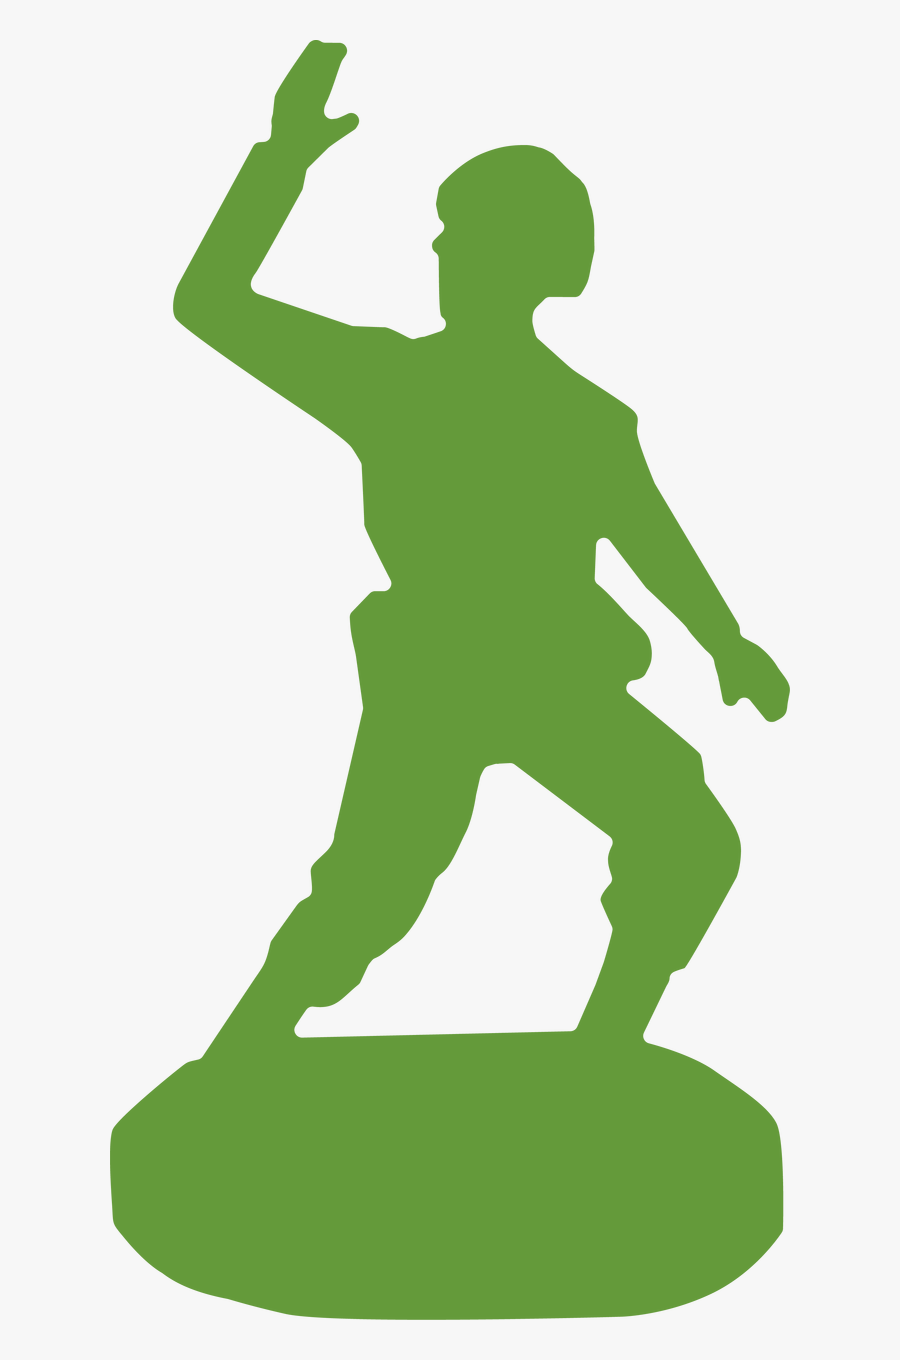 Toy Army Man Svg Cut File - Army Men Silhouette, Transparent Clipart